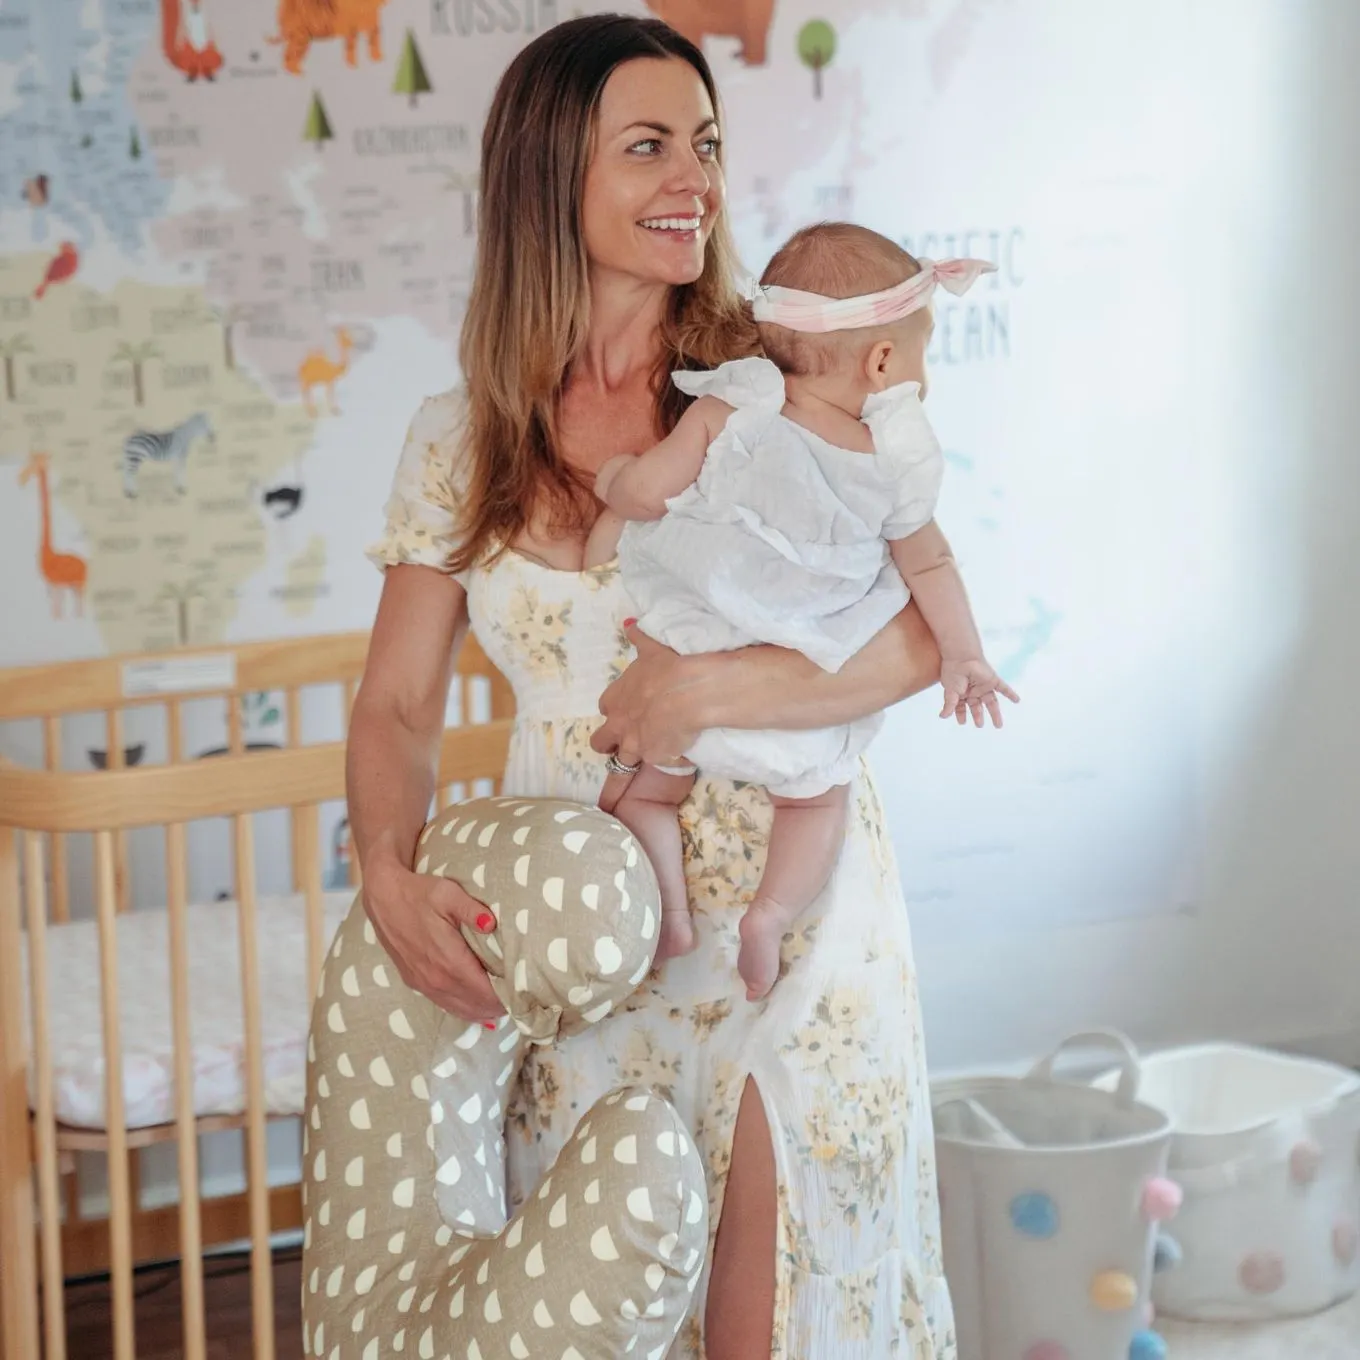 boppy is a female-owned brand